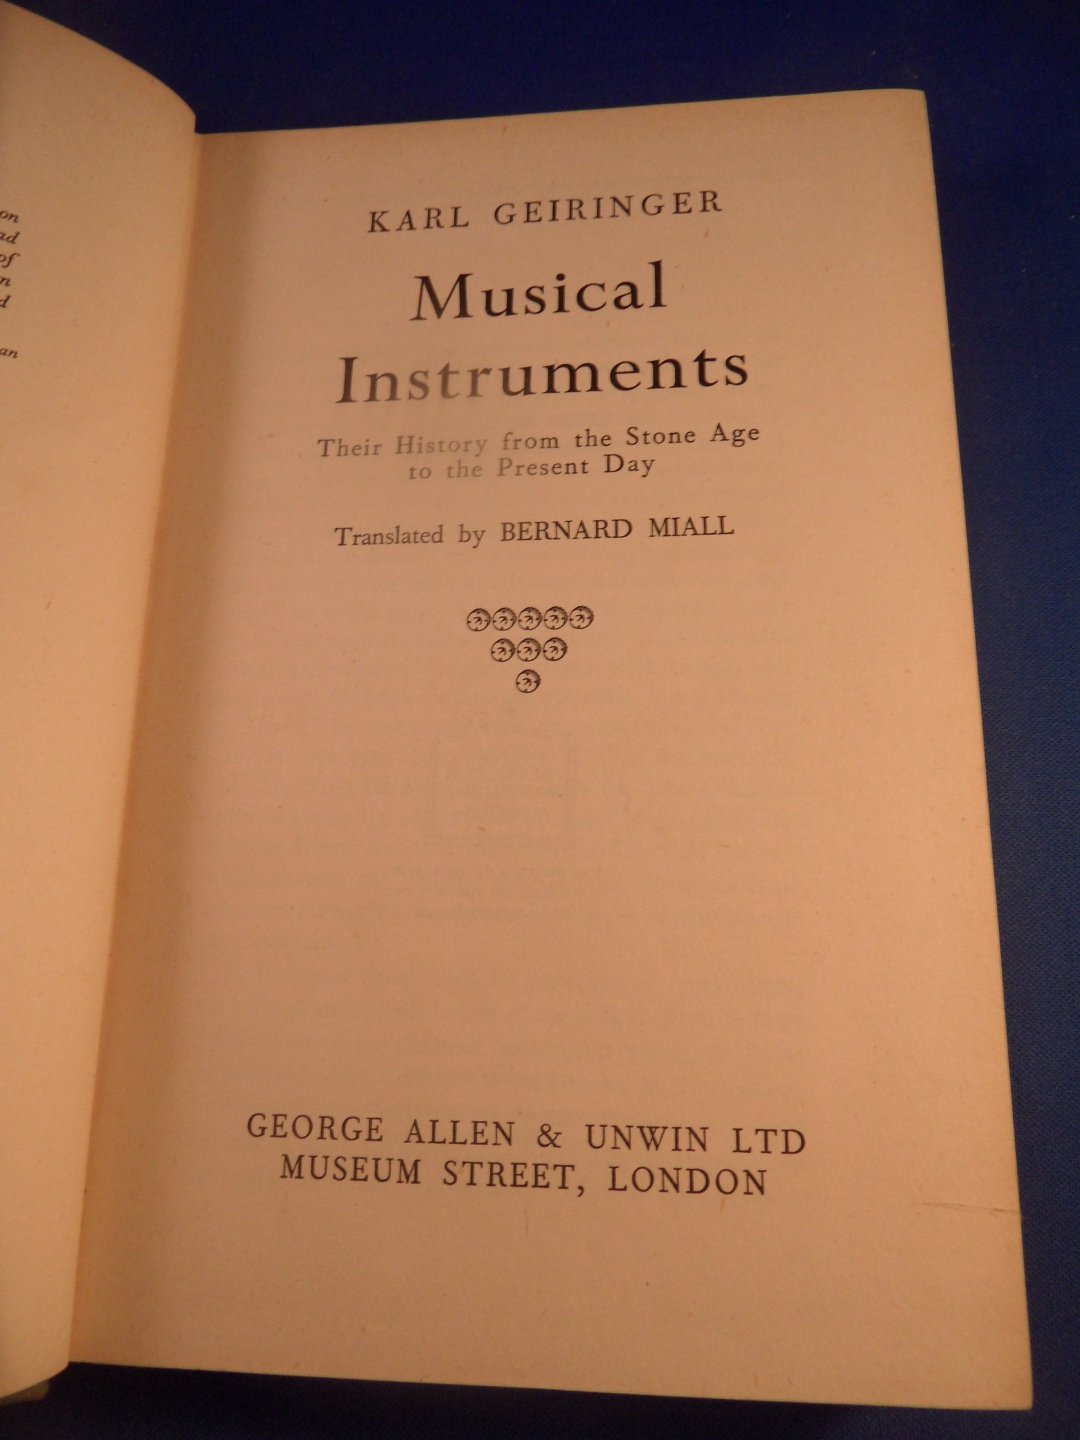 Geiringer, Karl - Musical Instruments. Their History in Western Culture from the Stone Age to Present Day